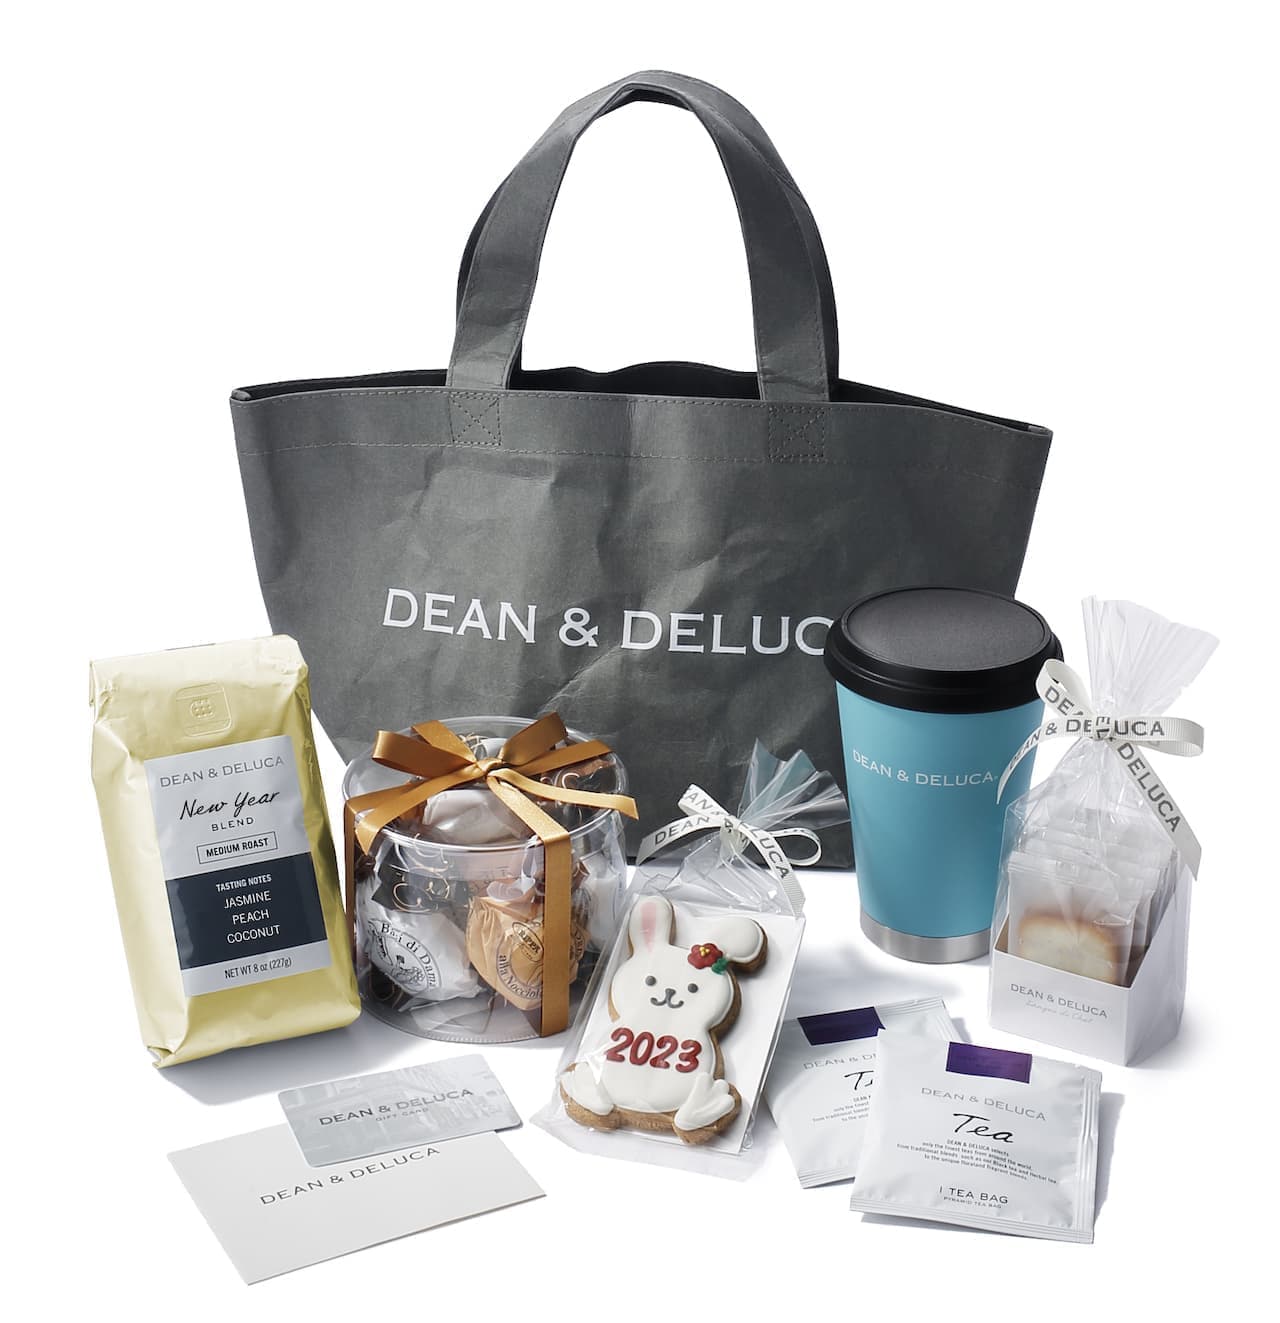 DEAN&DELUCA "Cafe Store Exclusive Coffee Assortment